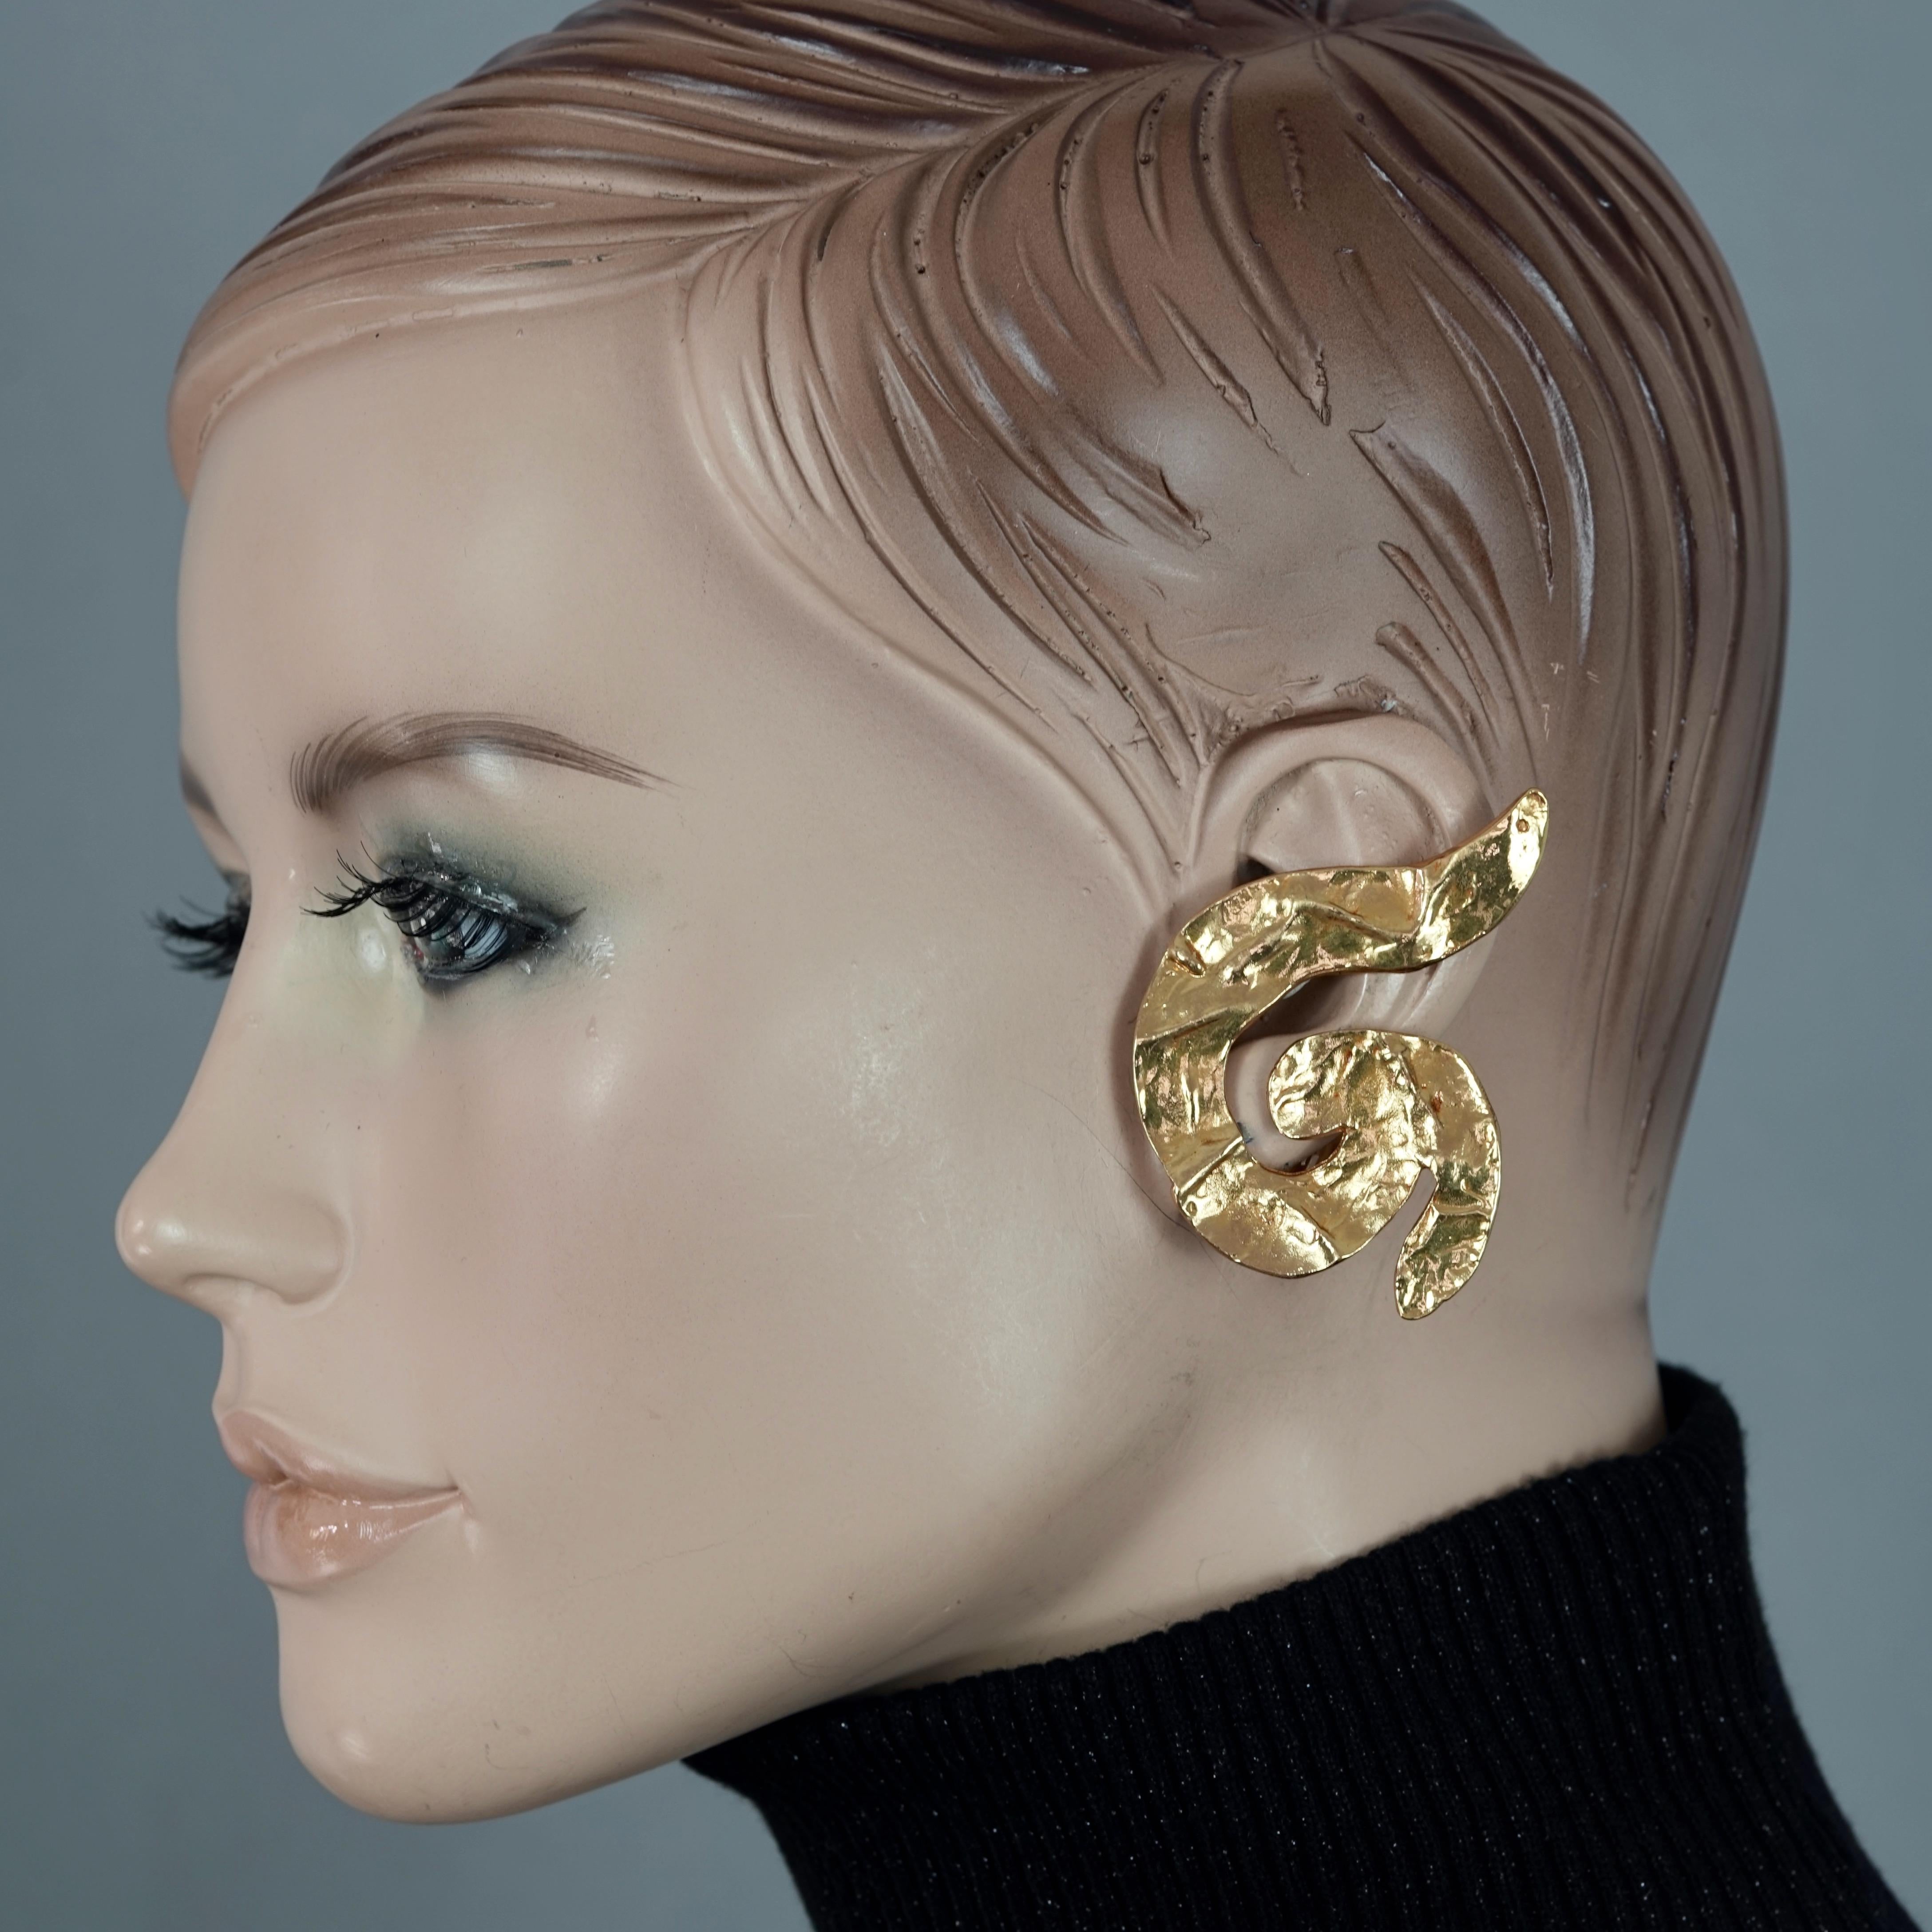 Vintage Massive YVES SAINT LAURENT Ysl Spiral Wrinkled Earrings

Measurements:
Height: 2.40 inches (6.1 cm)
Width: 1.69 inches (4.3 cm)
Weight: 19 grams

Features:
- 100% Authentic YVES SAINT LAURENT by Robert Goossens.
- Massive, wrinkled and